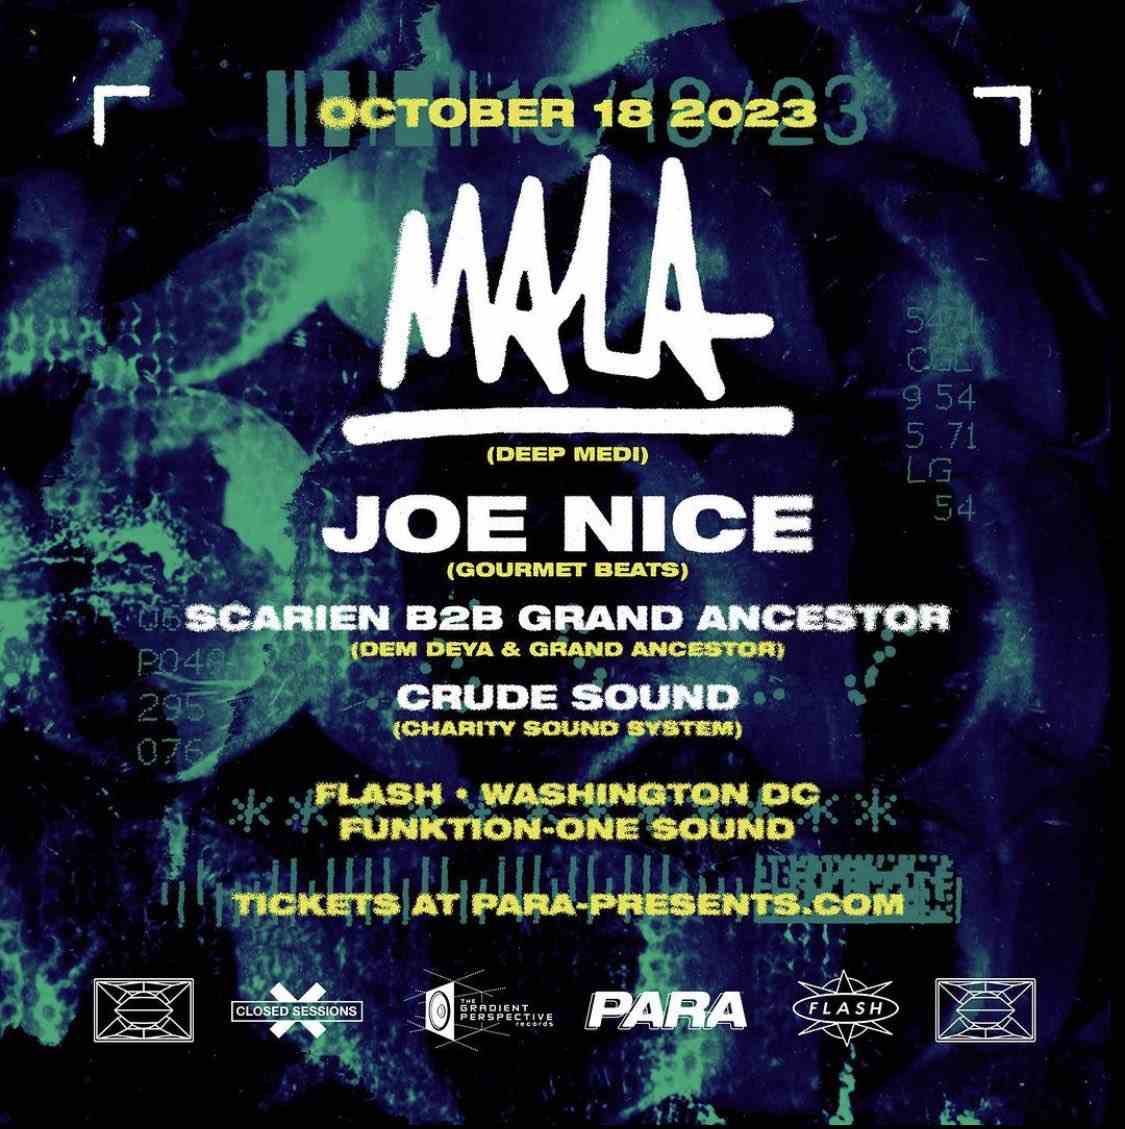 Para Presents, The Gradient Perspective & Closed Sessions Presents: Mala - Joe Nice event flyer